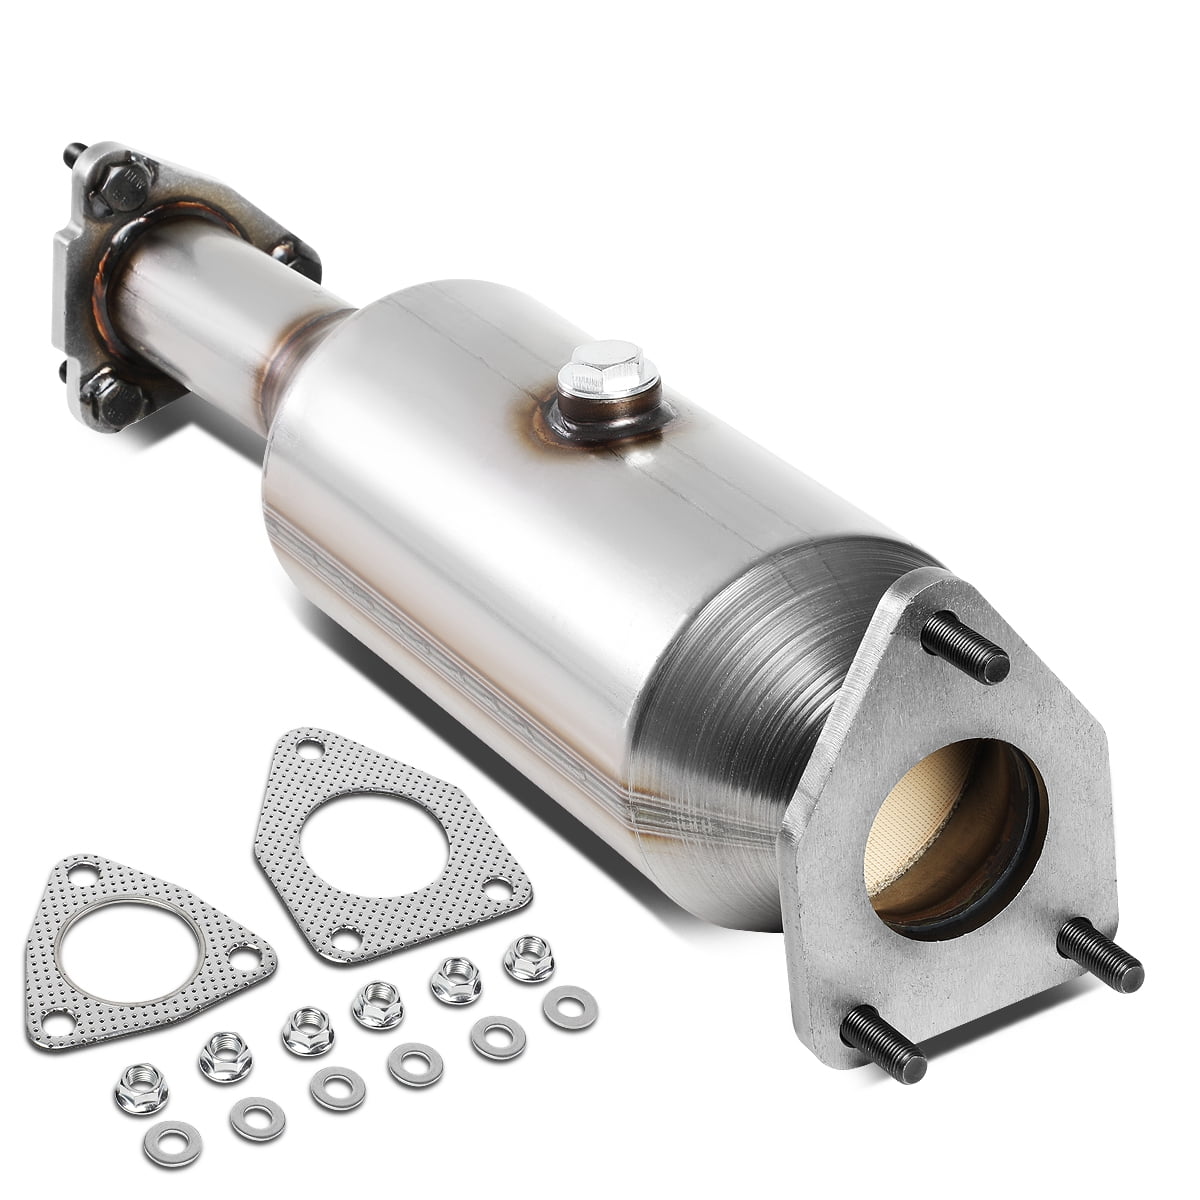 DNA Motoring OEM-CONV-YW-009 For 2004 to 2007 Honda Accord 2.4L Factory Style Center Catalytic 2007 Honda Accord 2.4 Catalytic Converter Oem